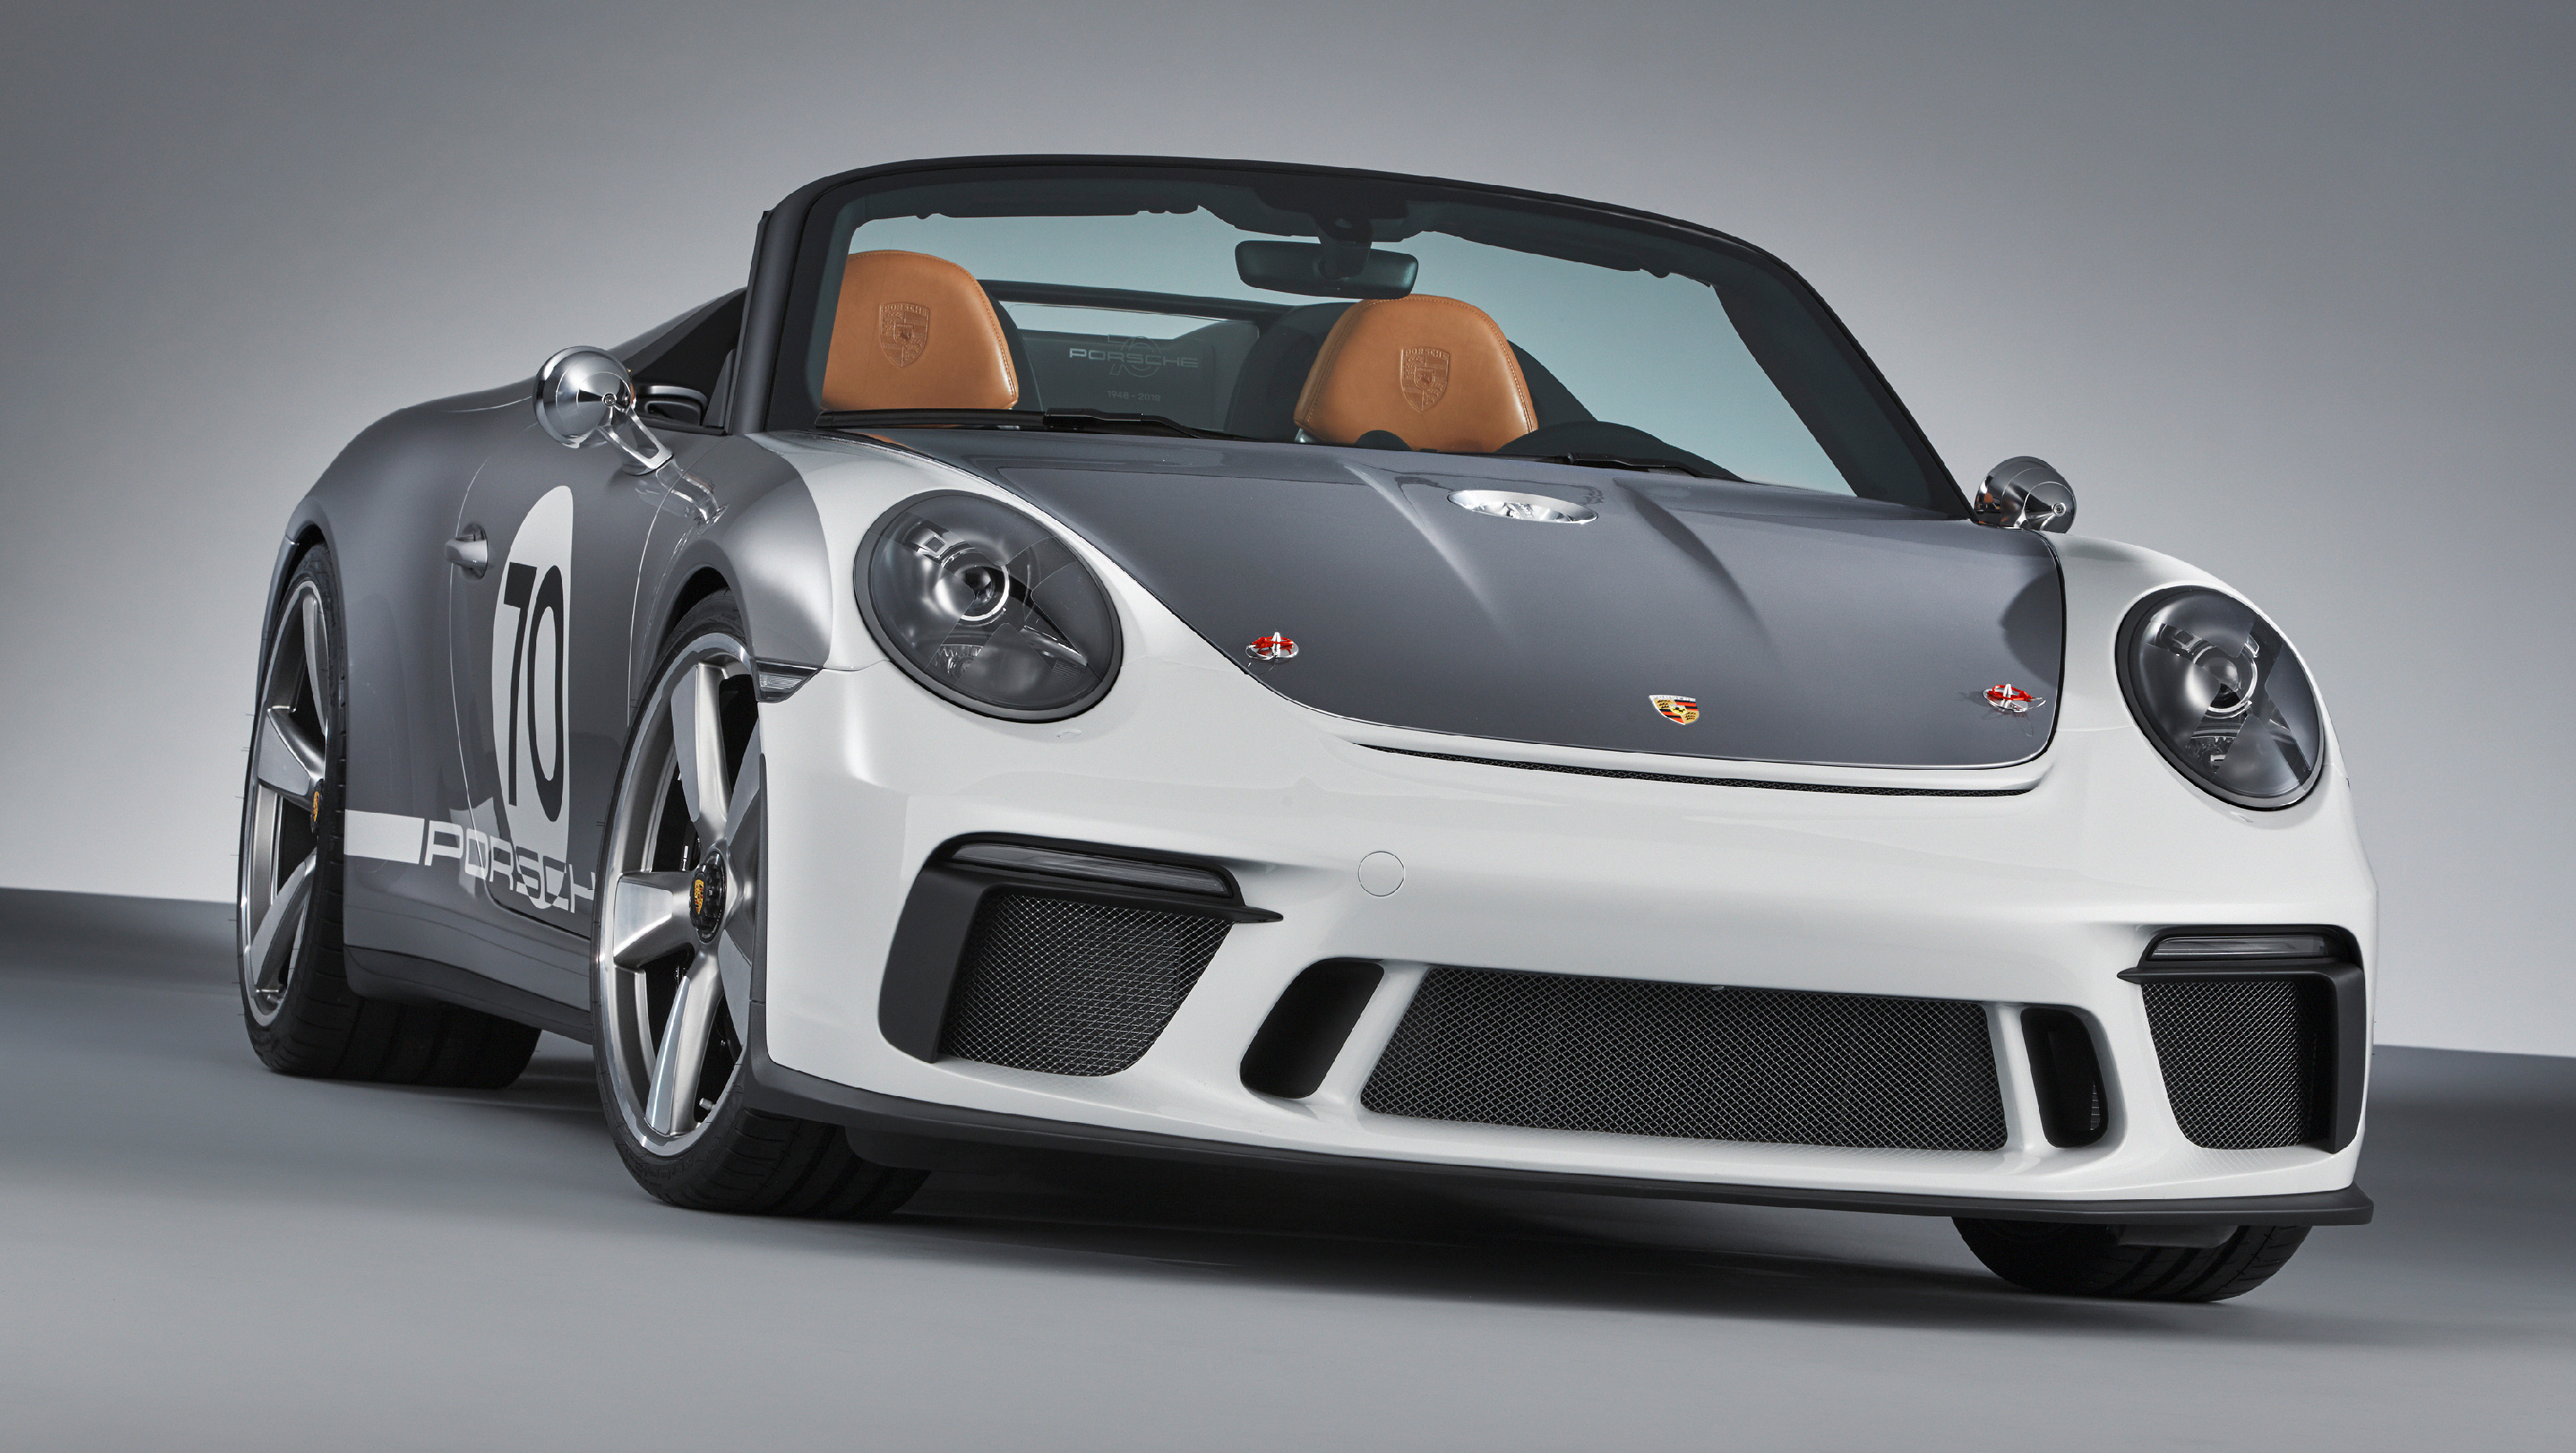 500hp porsche 911 speedster coming in 2019 as limited edition model 3884626 concept 2018 ag